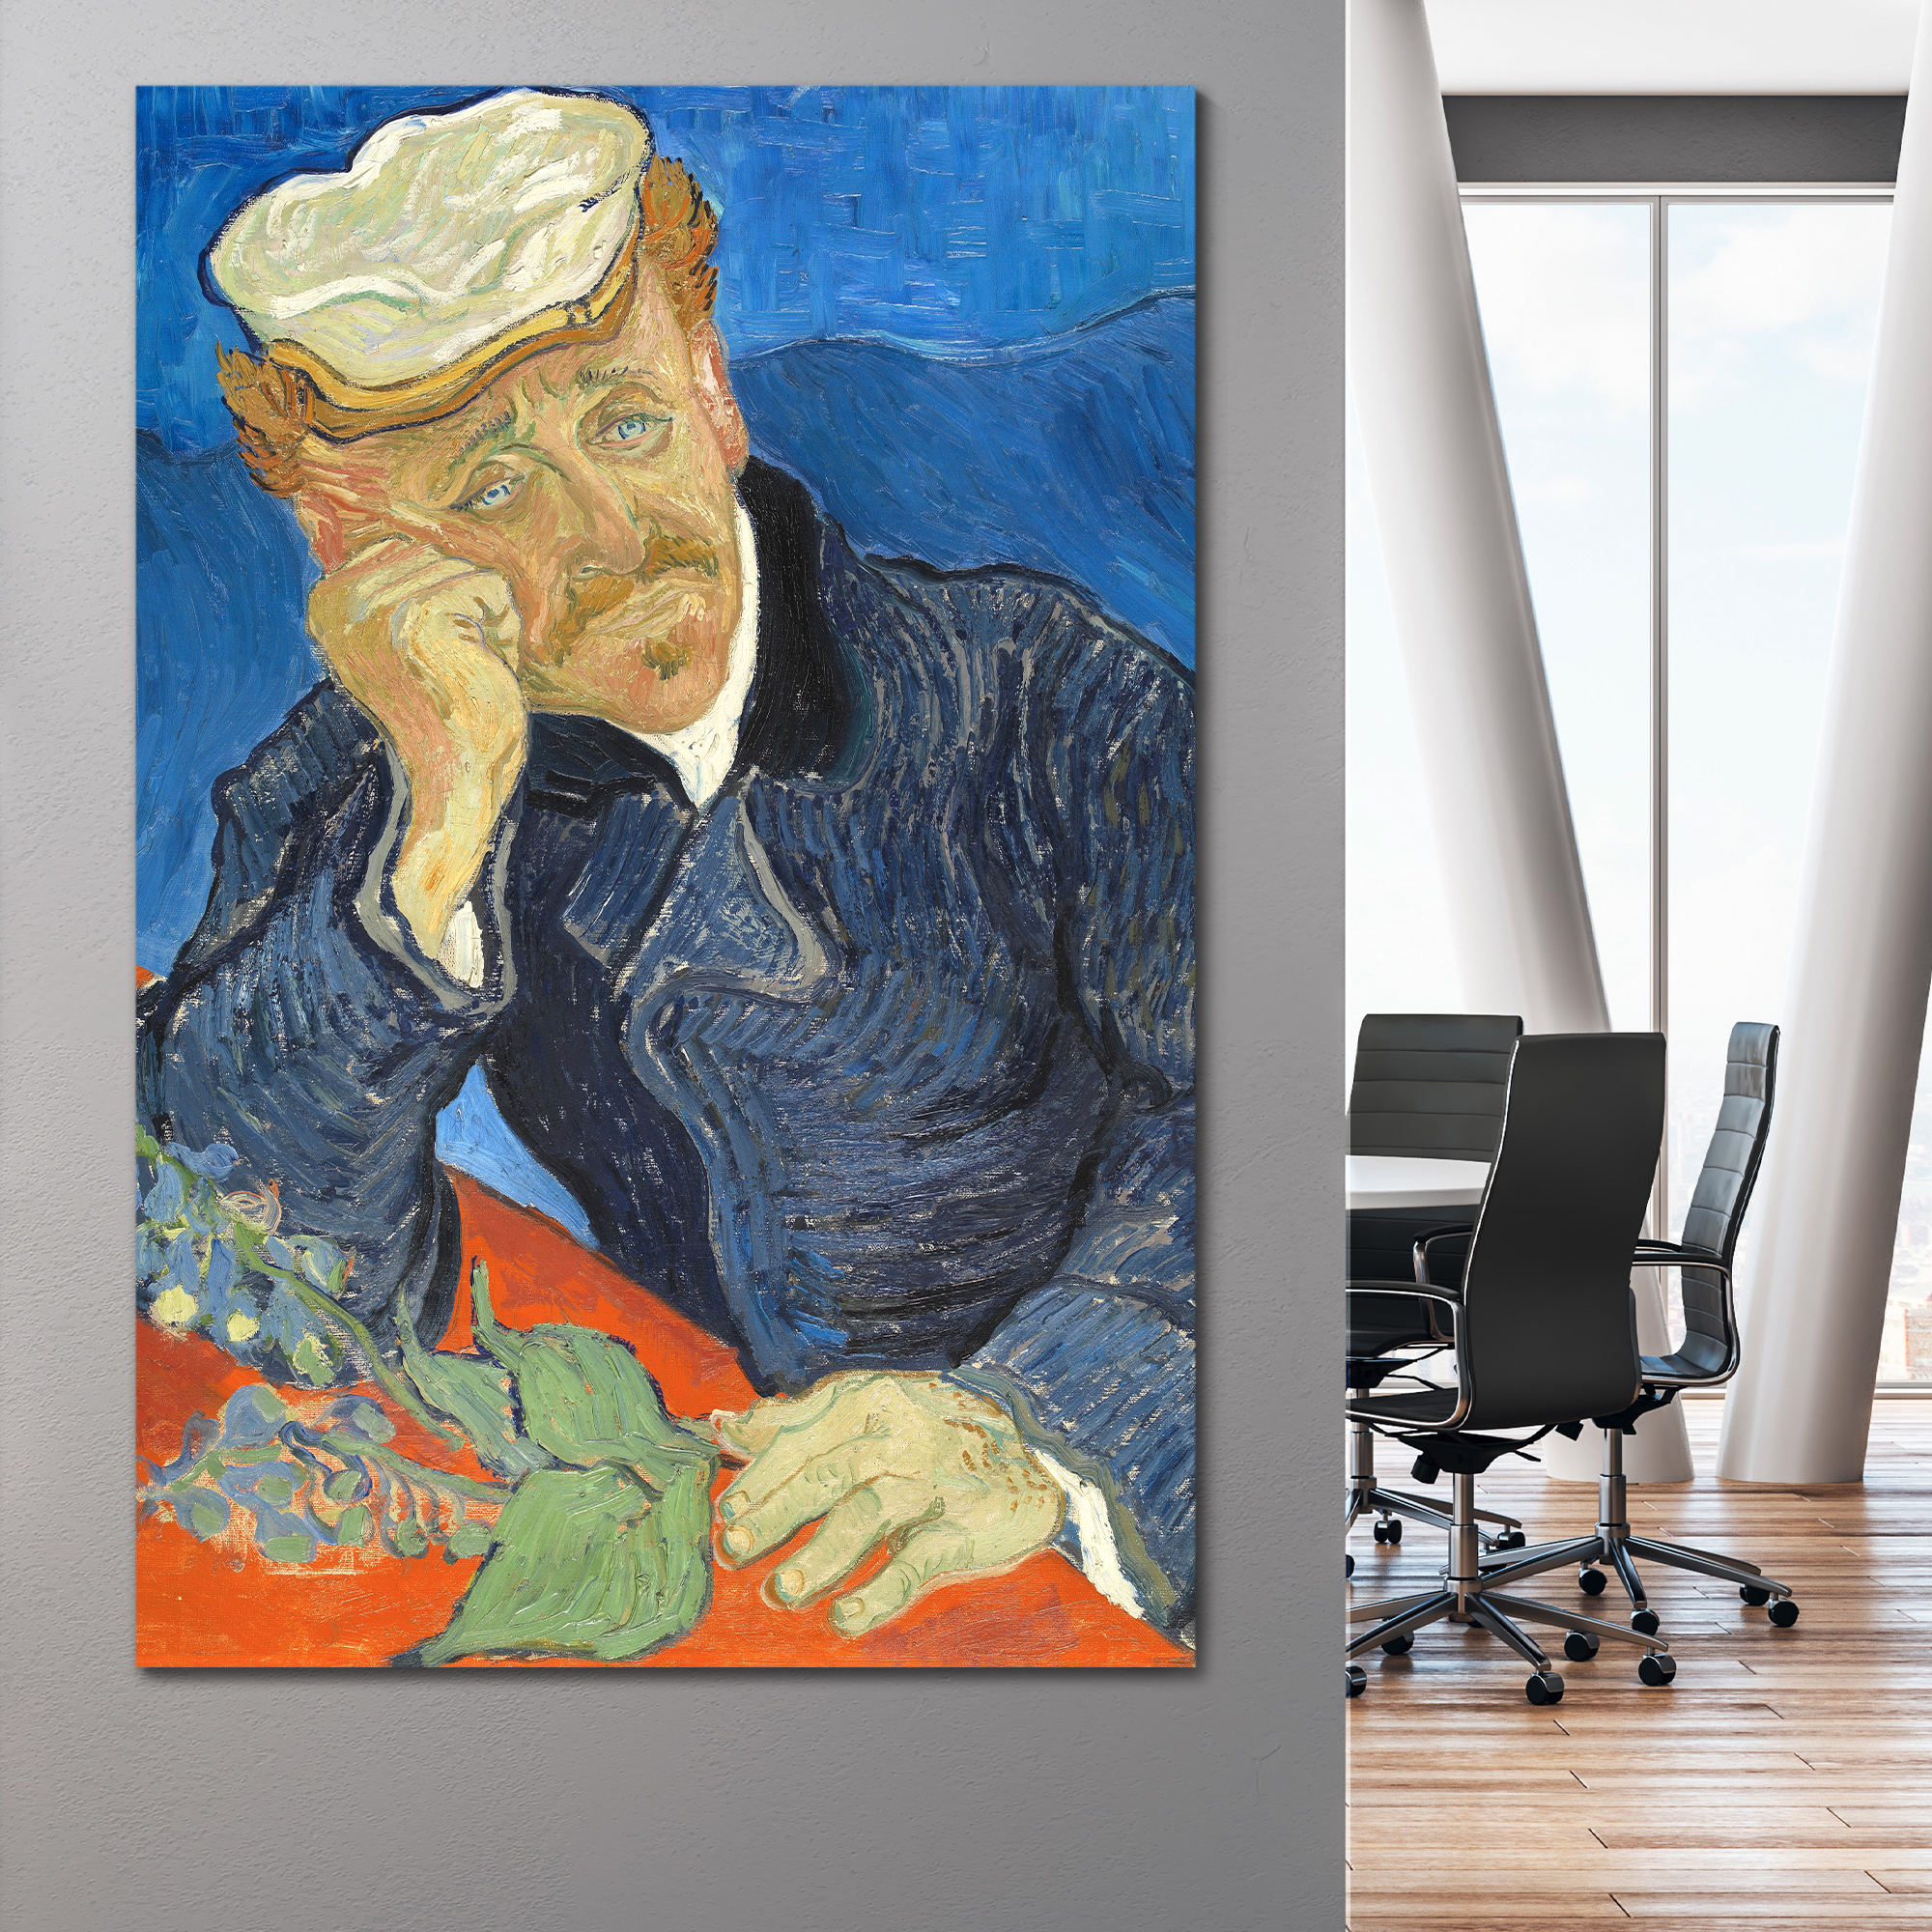 Dr Paul Gachet by Vincent Van Gogh - Oil Painting Reproduction on Canvas Prints Wall Art, Ready to Hang - 24